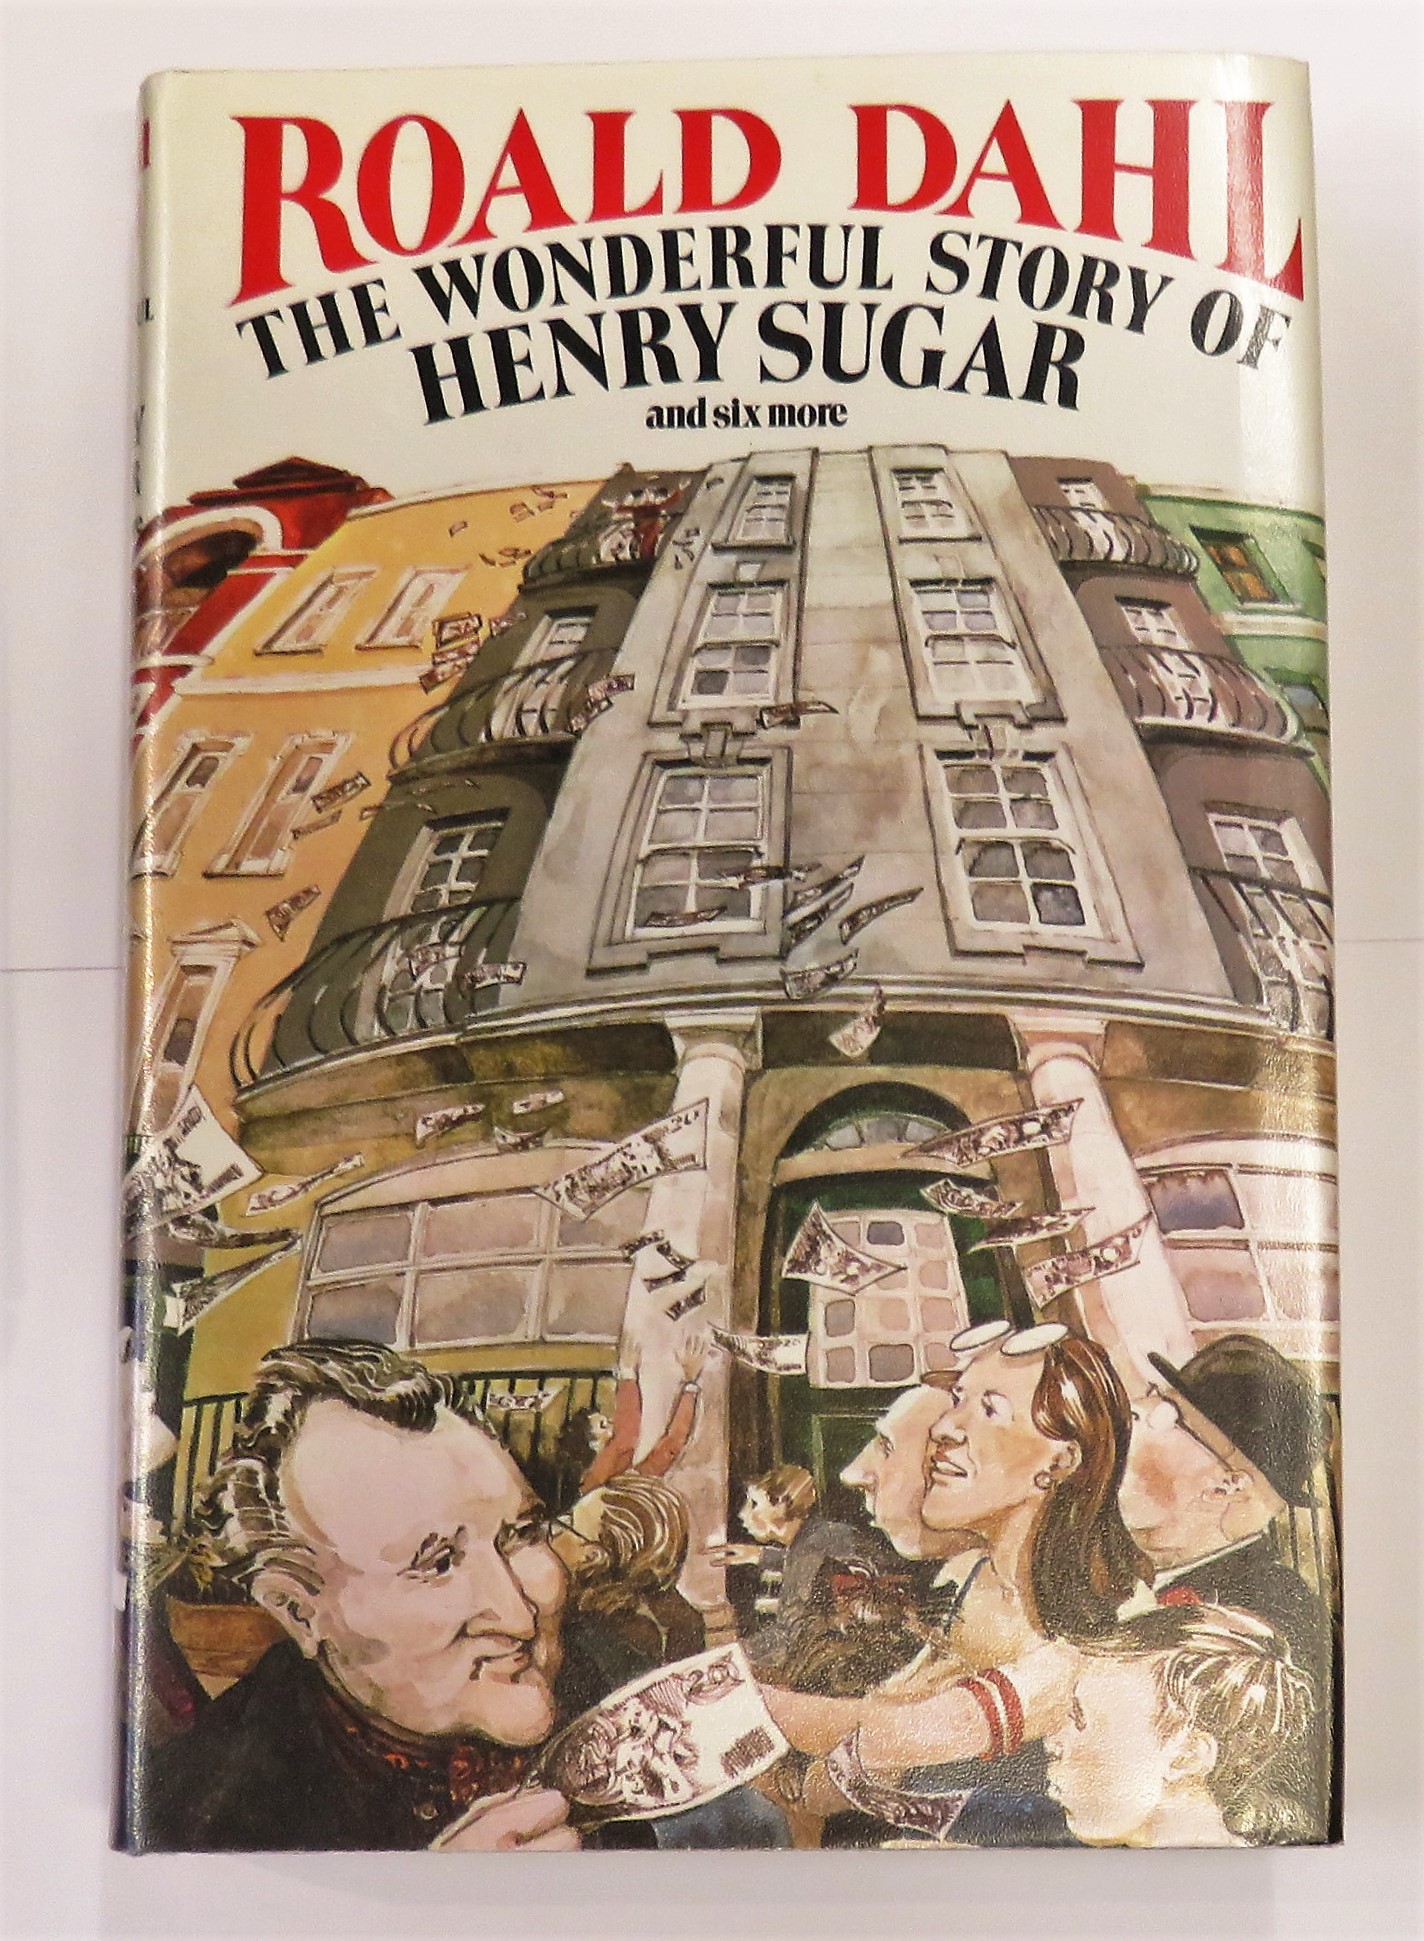 The Wonderful Story Of Henry Sugar and six more Signed by Roald Dahl 